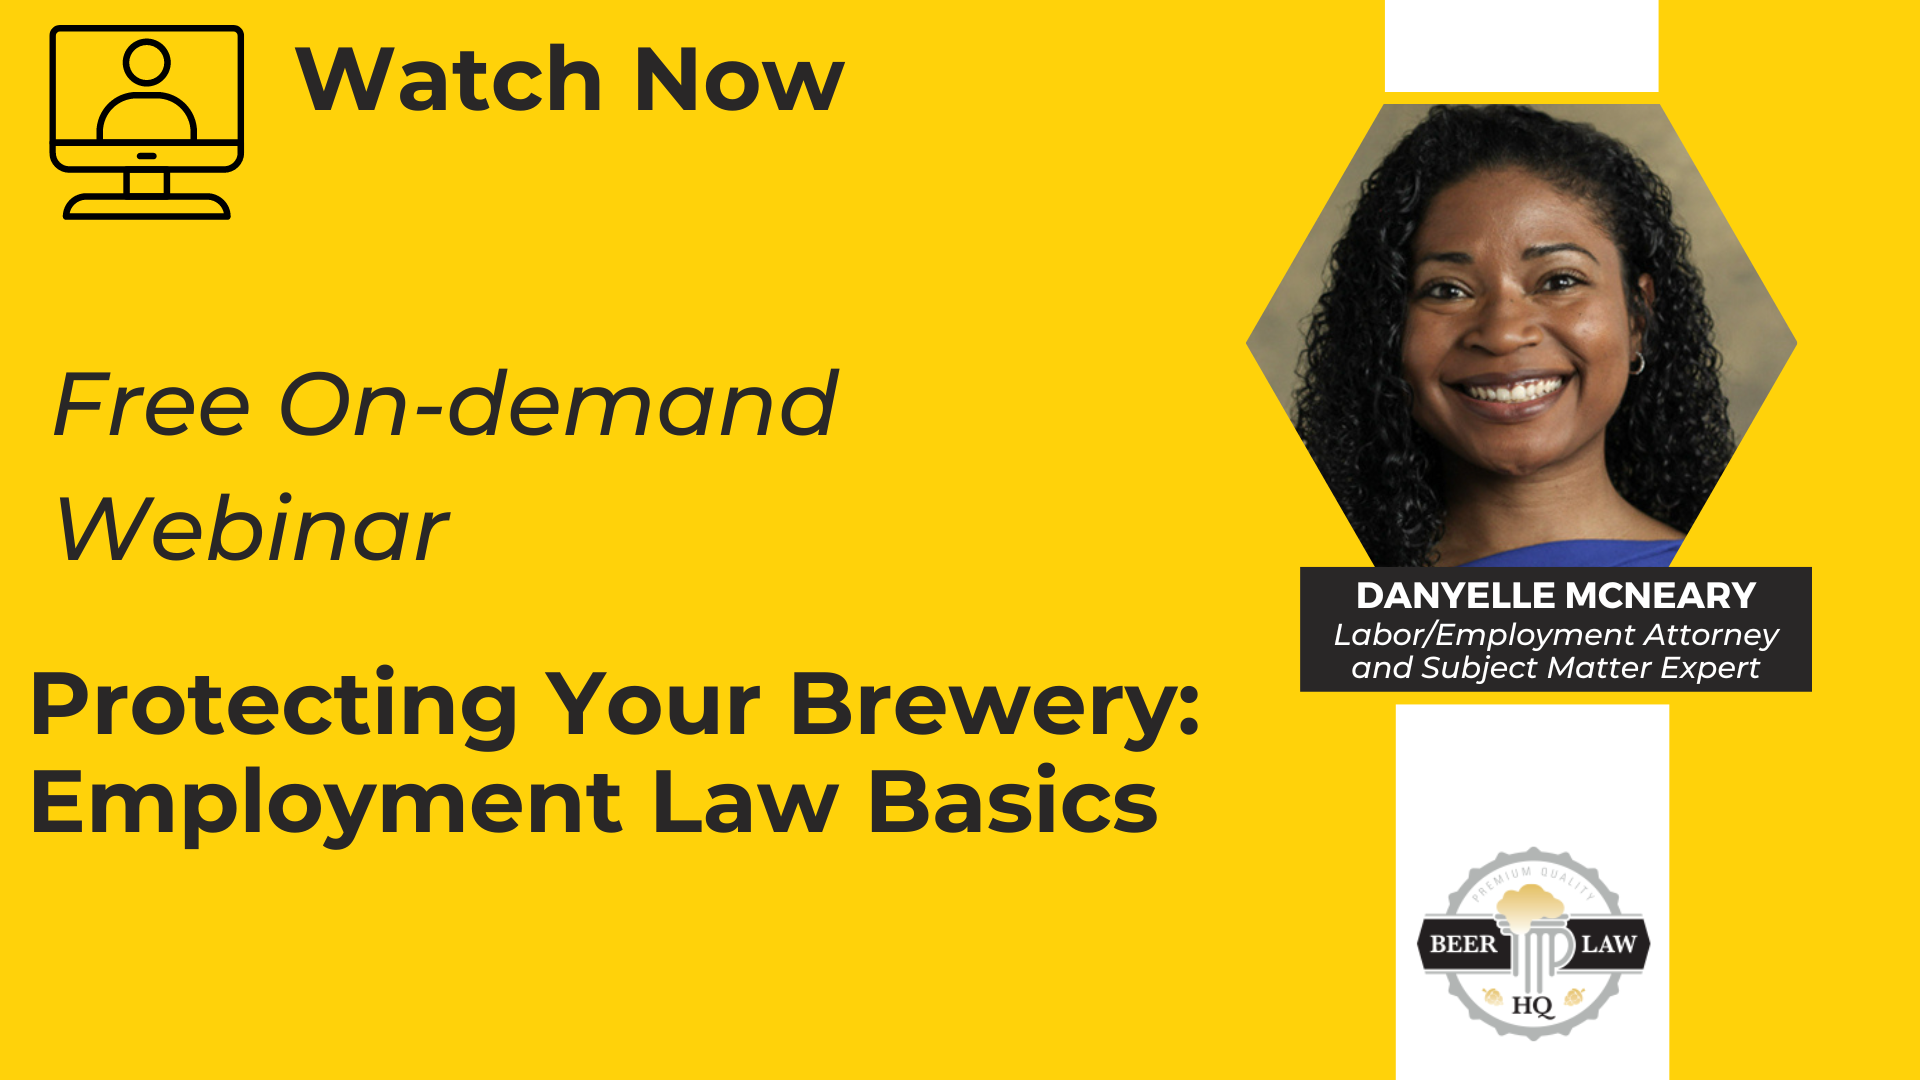 Protecting Your Brewery: Employment Law Basics